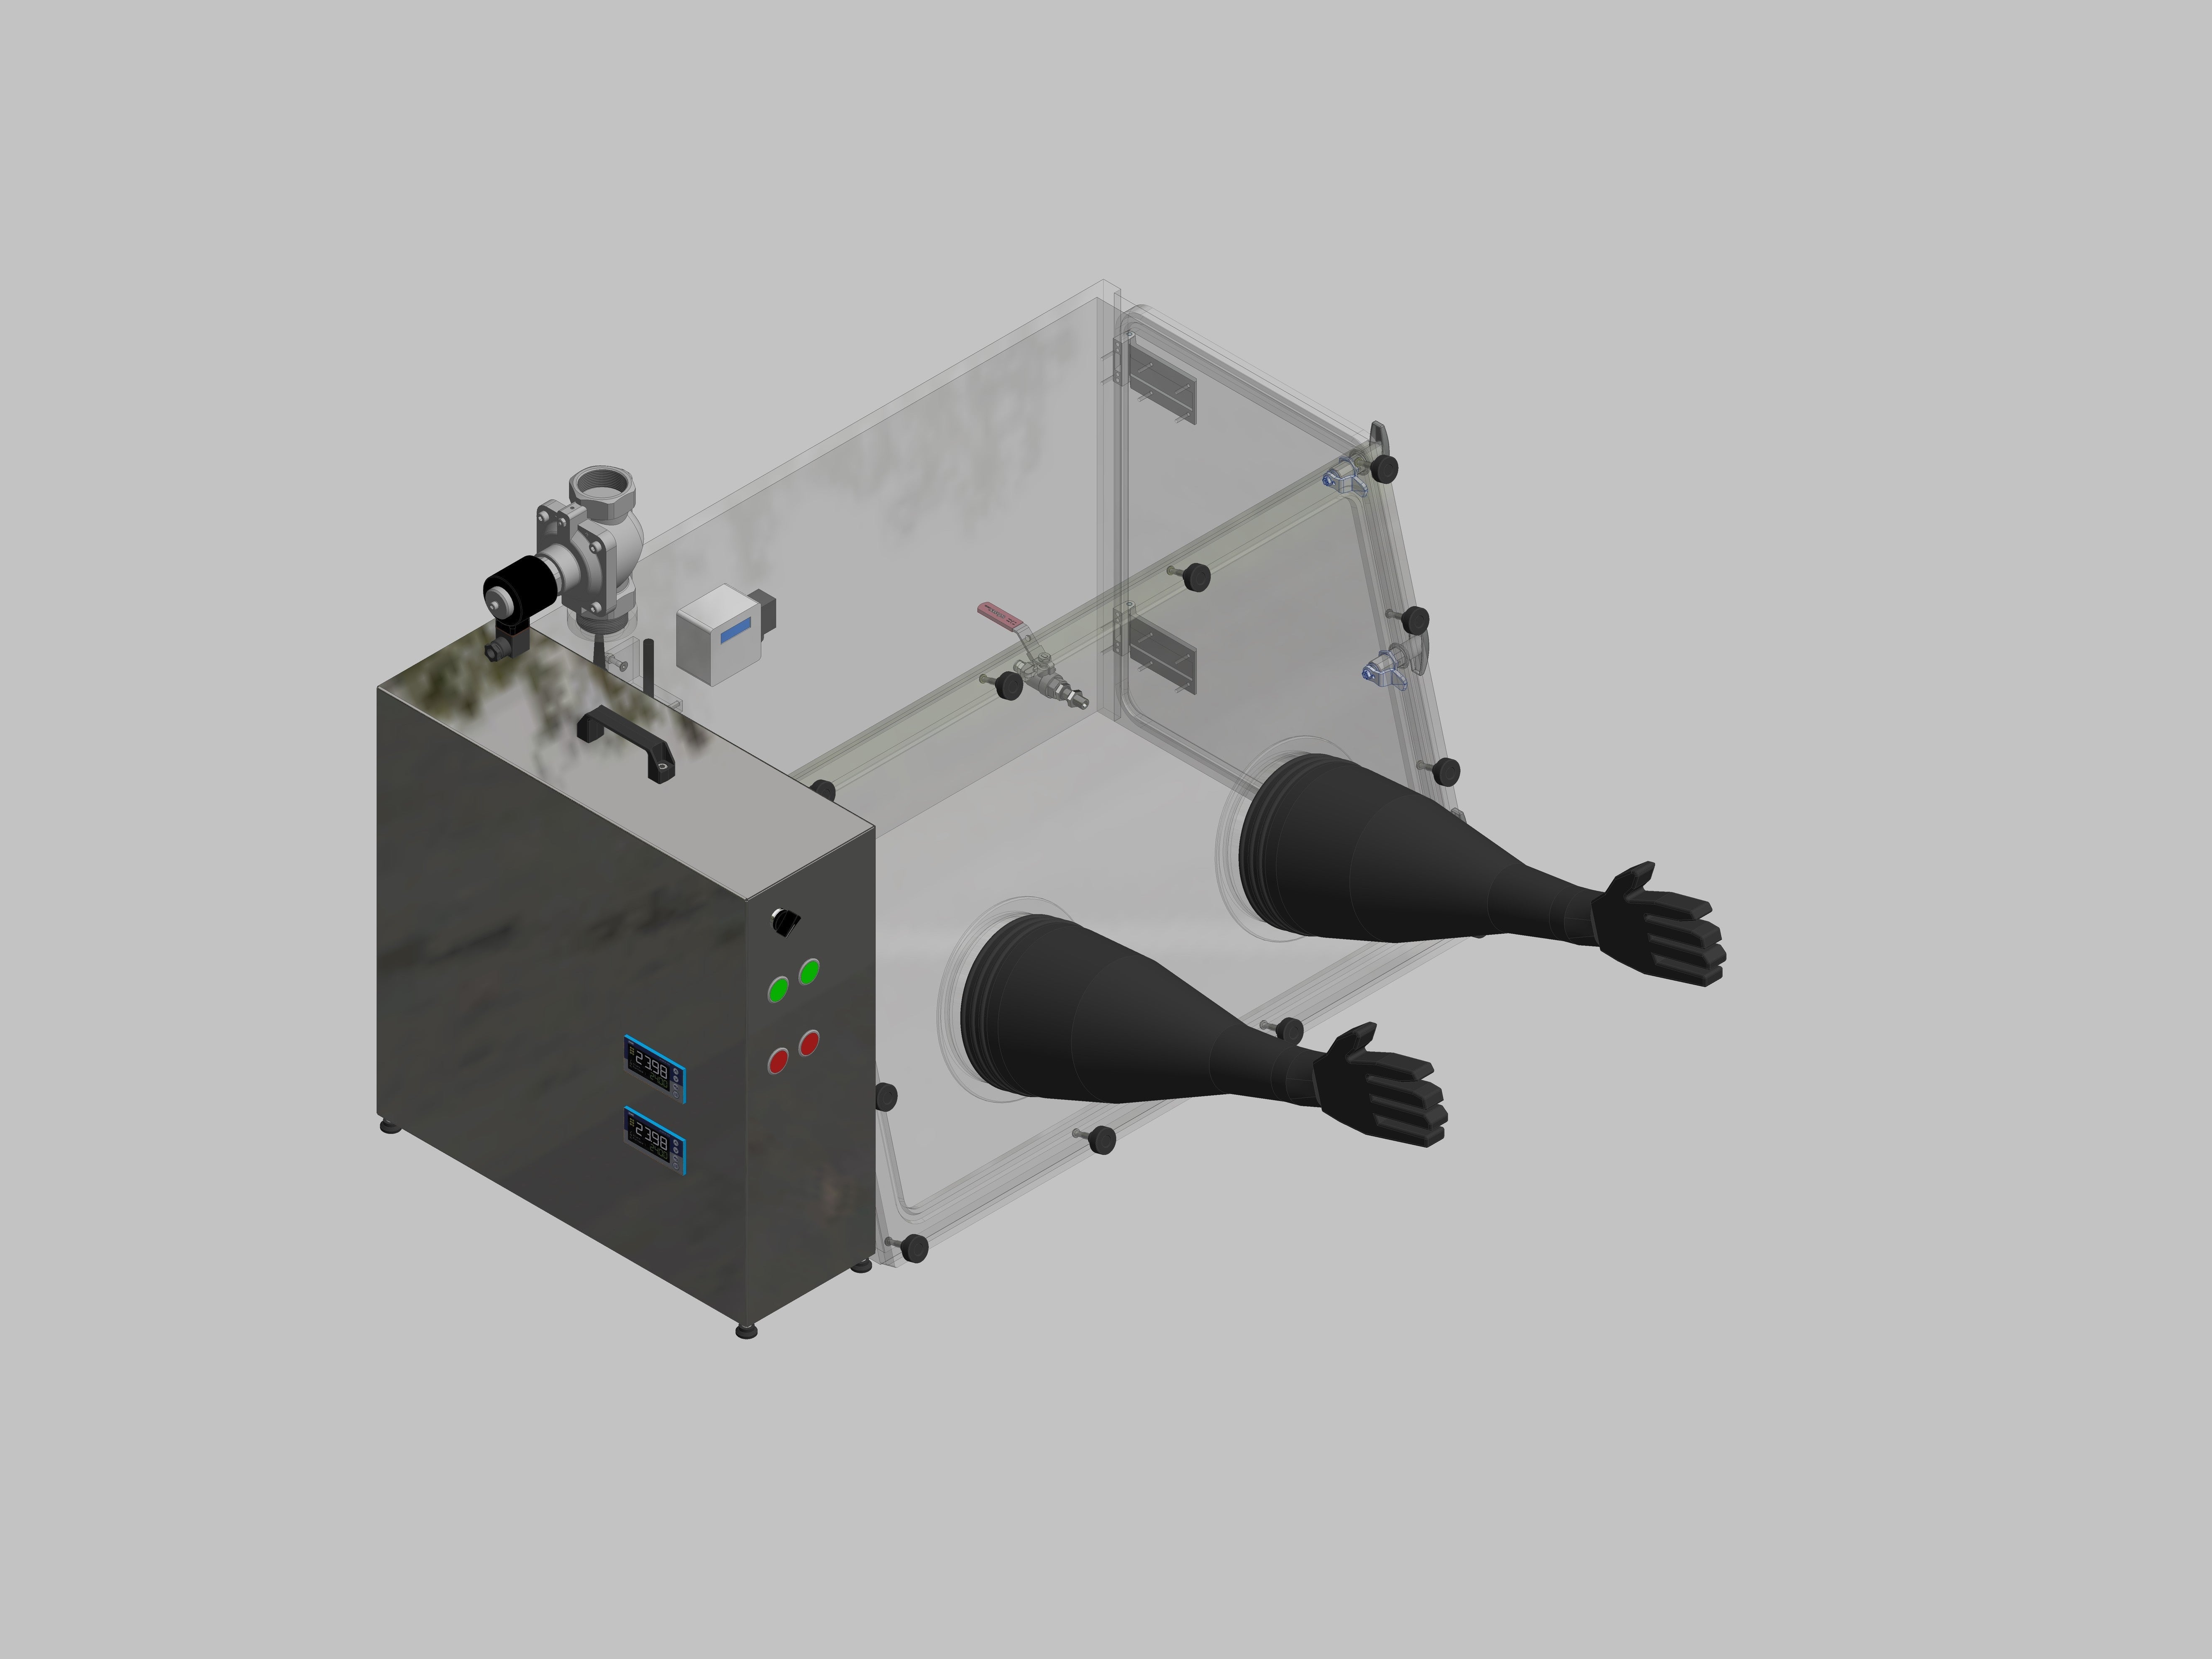 Glovebox made of acrylic&gt; Gas filling: automatic flushing with pressure control, front design: removable, side design: hinged doors, control: humidity regulator with oxygen display